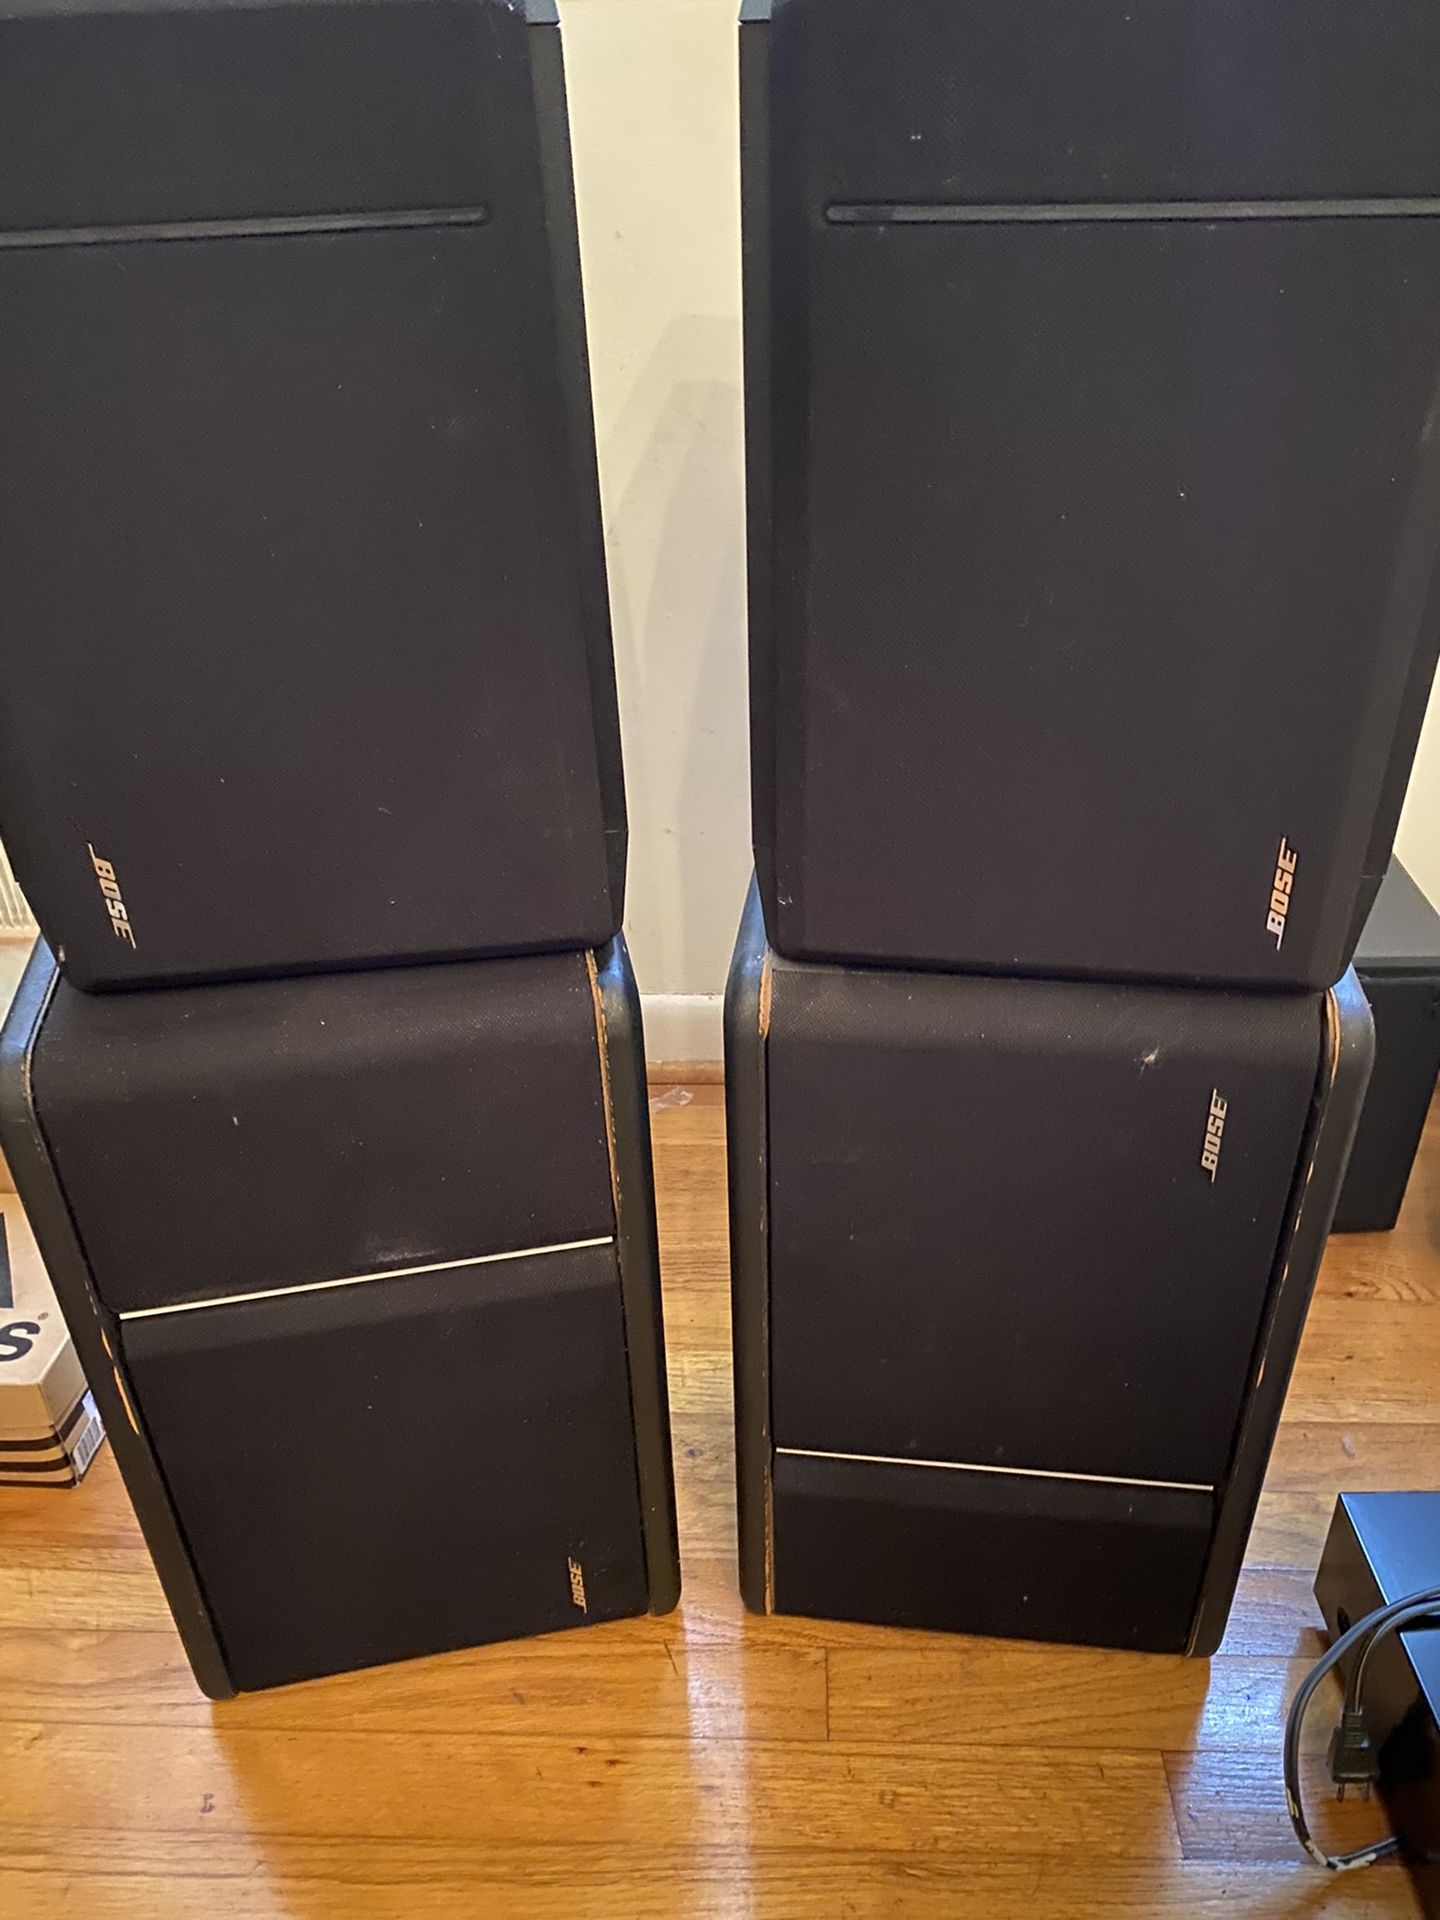 Bose 301 Continental And Series IV Direct/Reflecting speakers